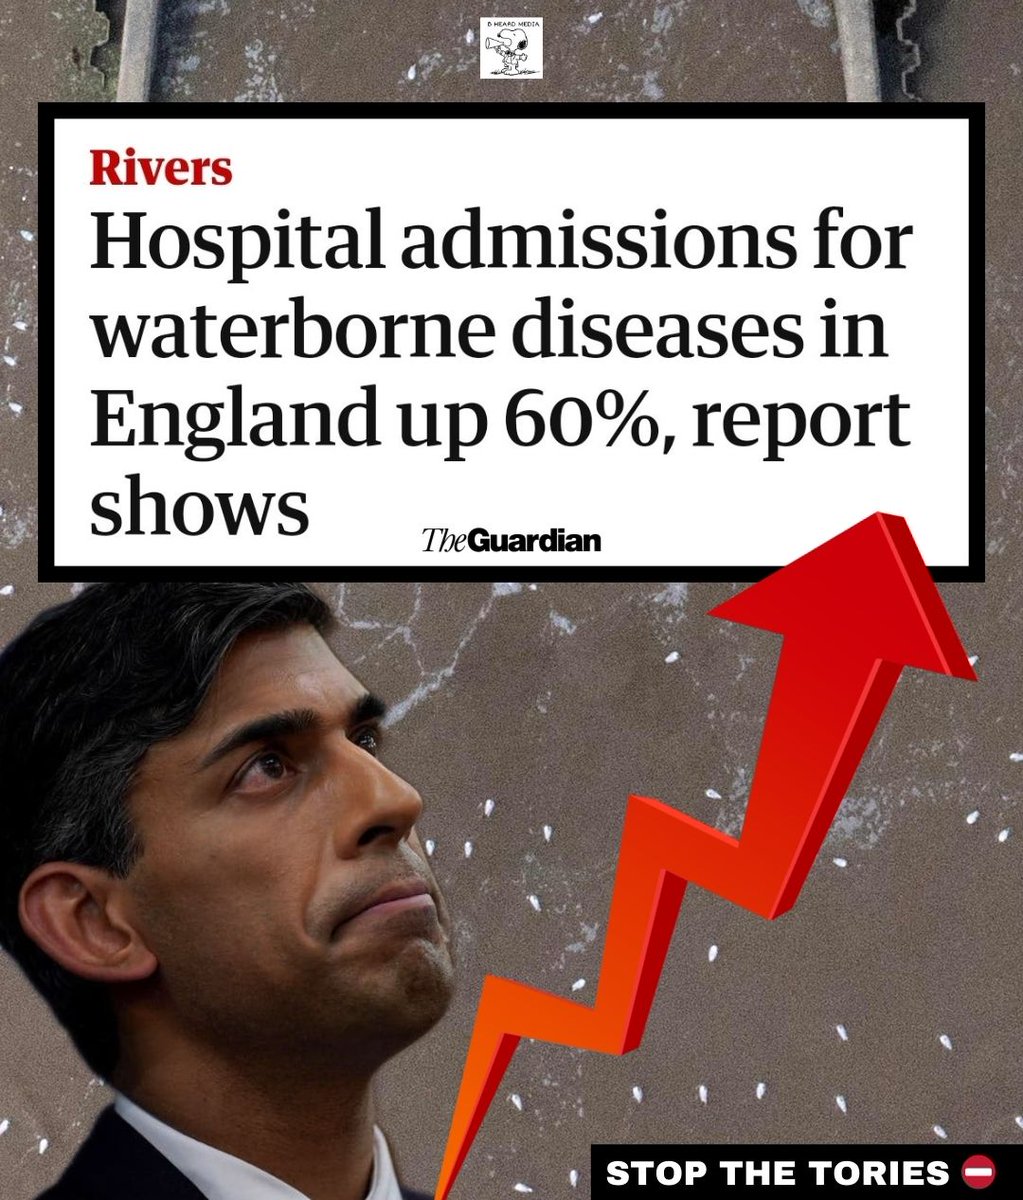 NHS hospital admissions for waterborne disease in England up 60%

The number of people admitted to hospital with diseases transmitted via waterborne infection has increased from 2,085 in 2010-11 to 3,286 in 2022-23
#SewageScandal
#TorySewageParty
#ToriesOut632
#RenationaliseWater